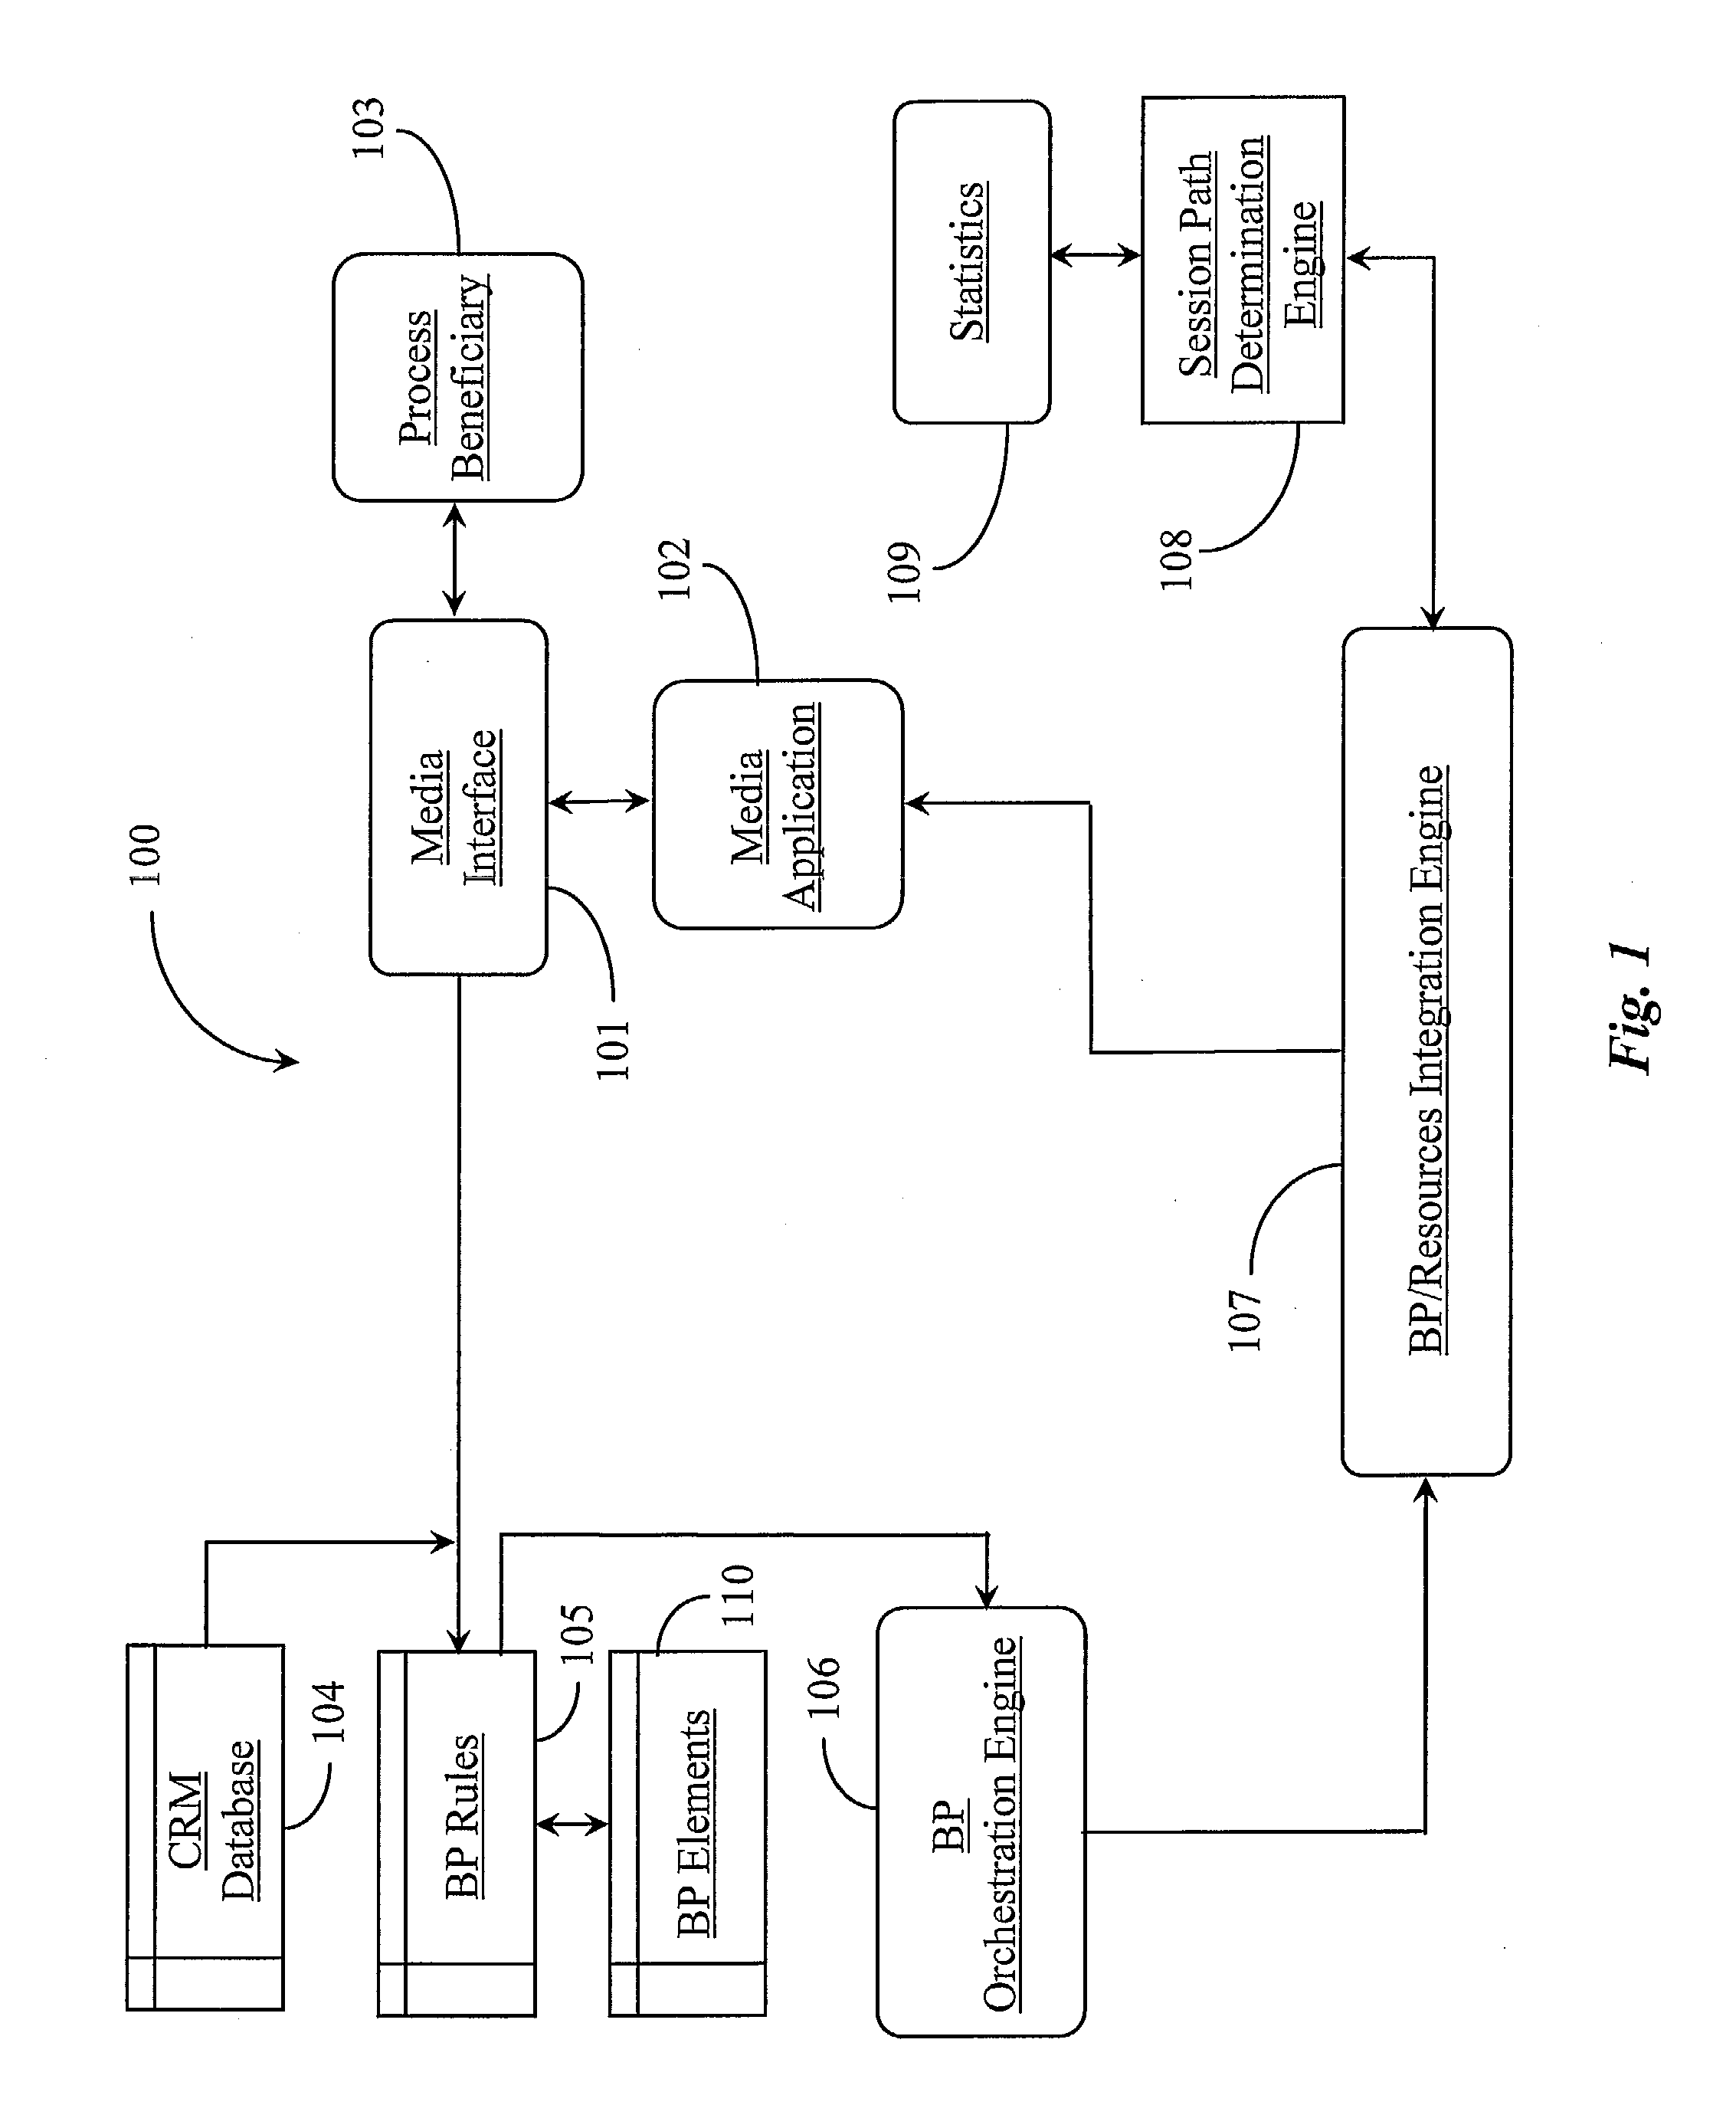 Method for Assembling a Business Process and for Orchestrating the Process Based on Process Beneficiary Information